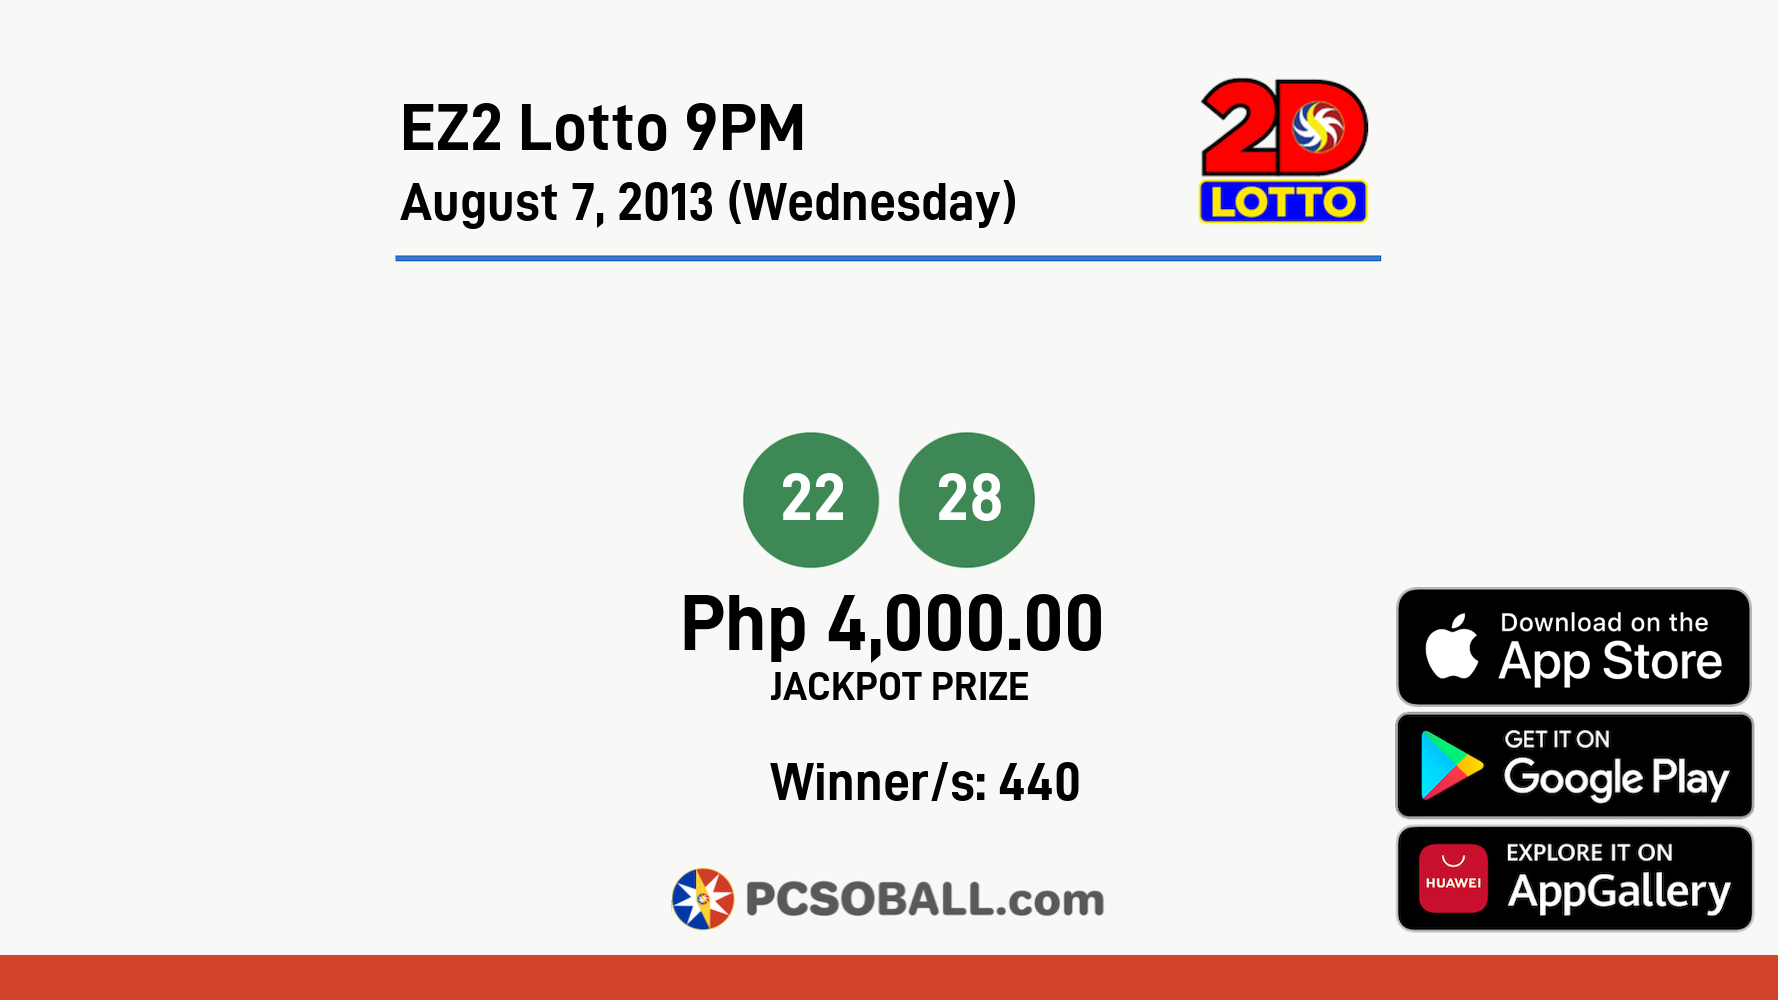 EZ2 Lotto 9PM August 7, 2013 (Wednesday) Result